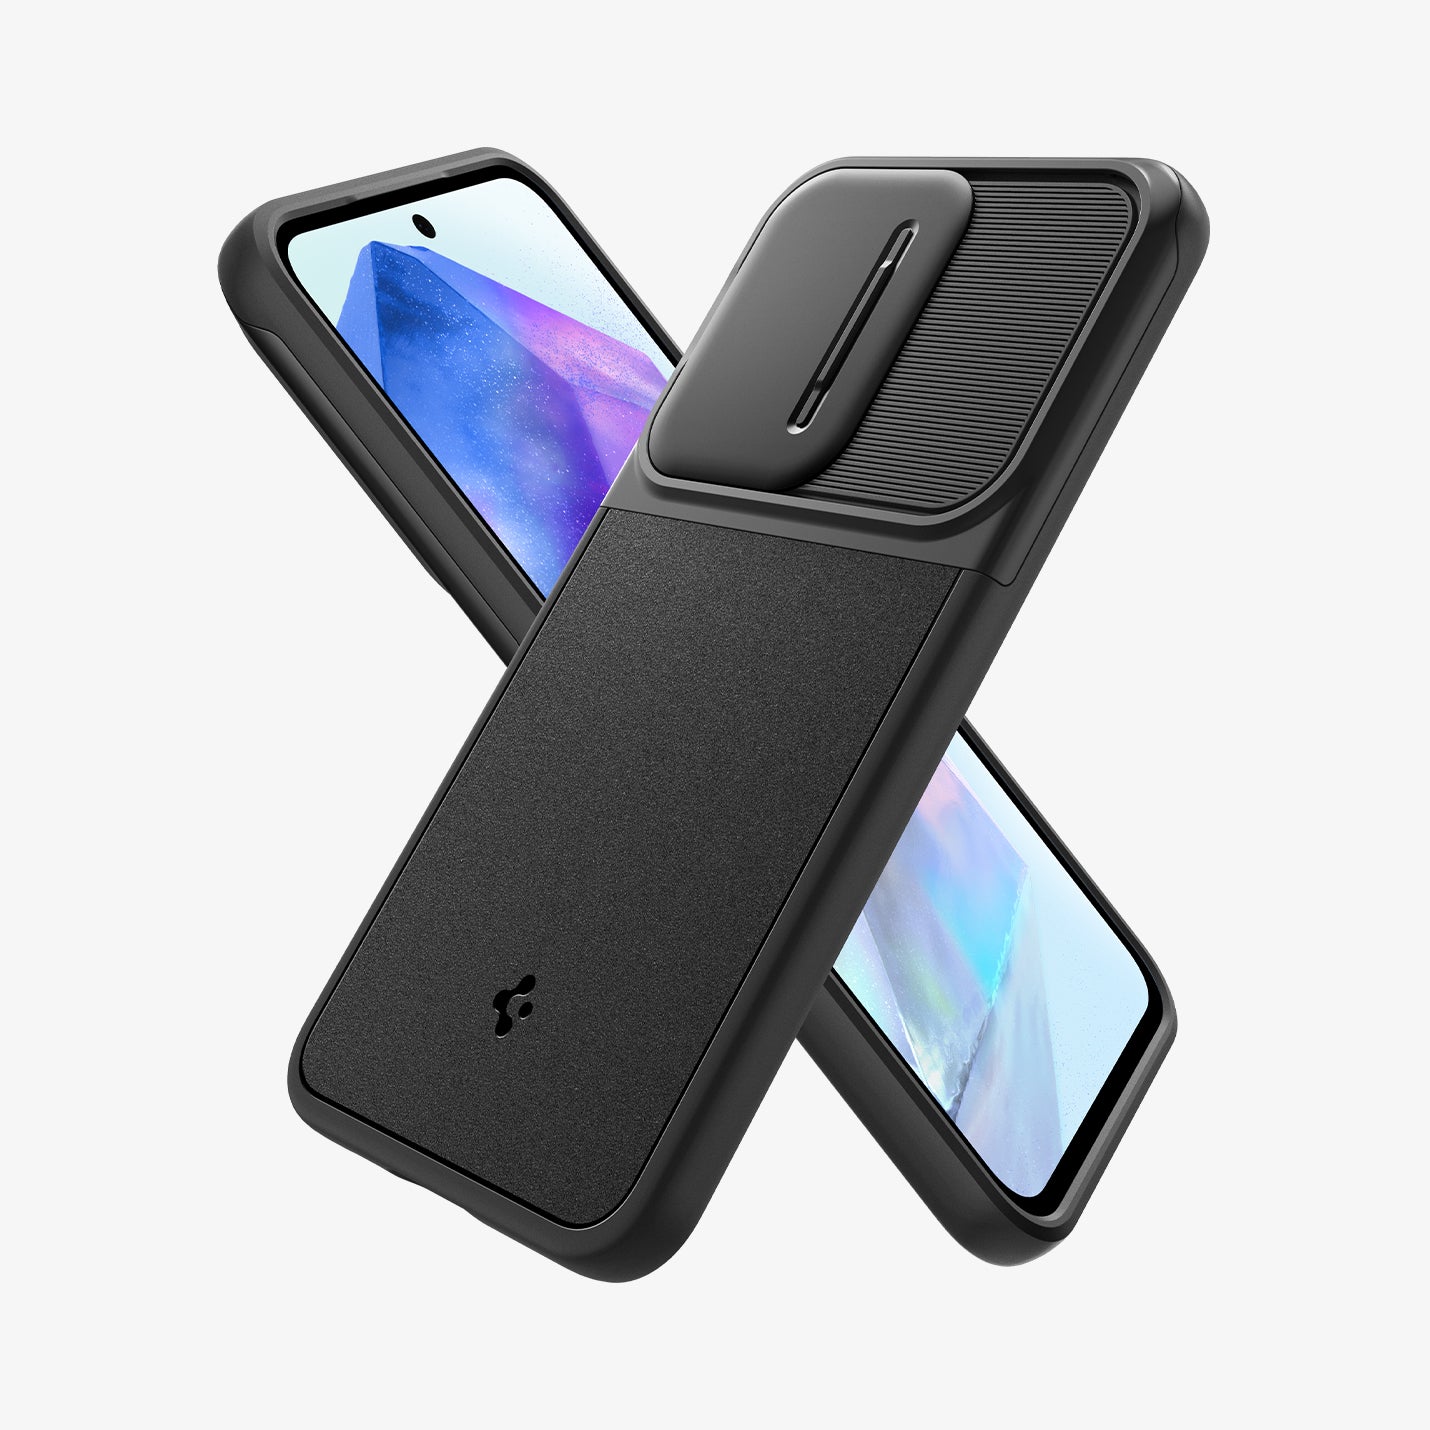 ACS07535 - Galaxy A55 5G Case Optik Armor in Black showing the back, partial side and behind it, a device showing partial front and side